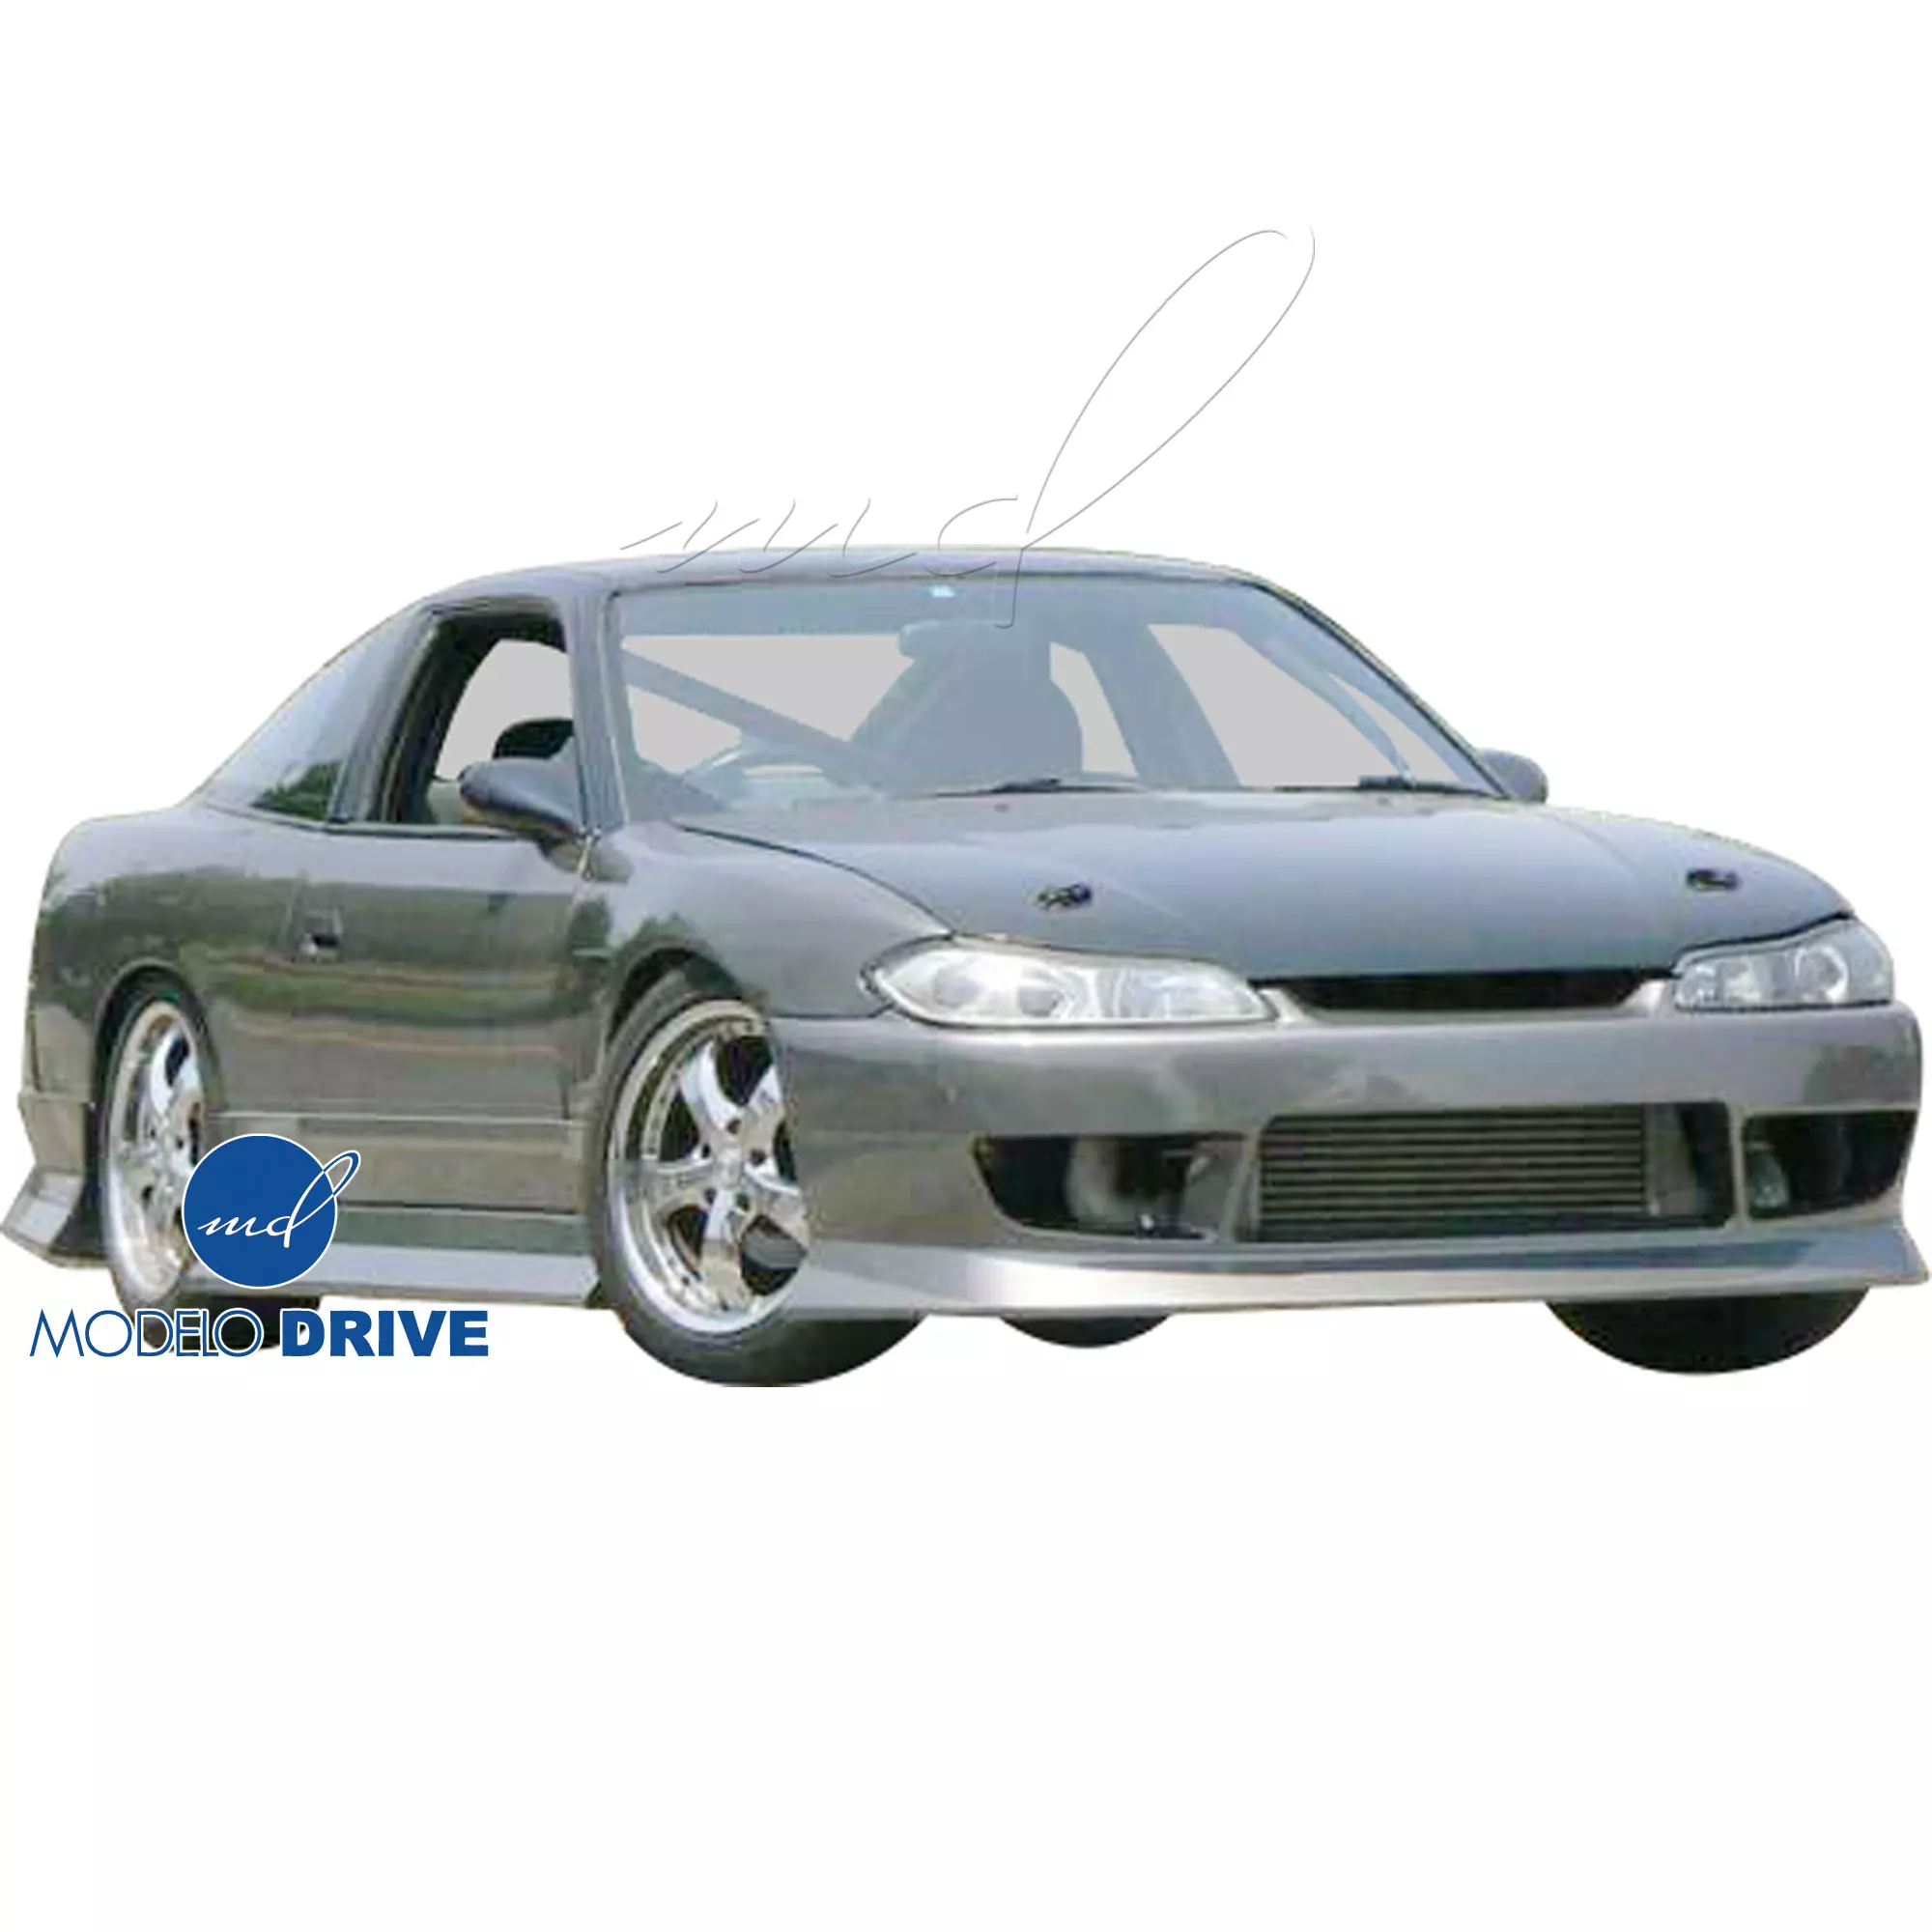 ModeloDrive FRP ORI S13.5 Wide Body 20mm Fenders (front) > Nissan 240SX 1989-1994 > 2/3dr - Image 6